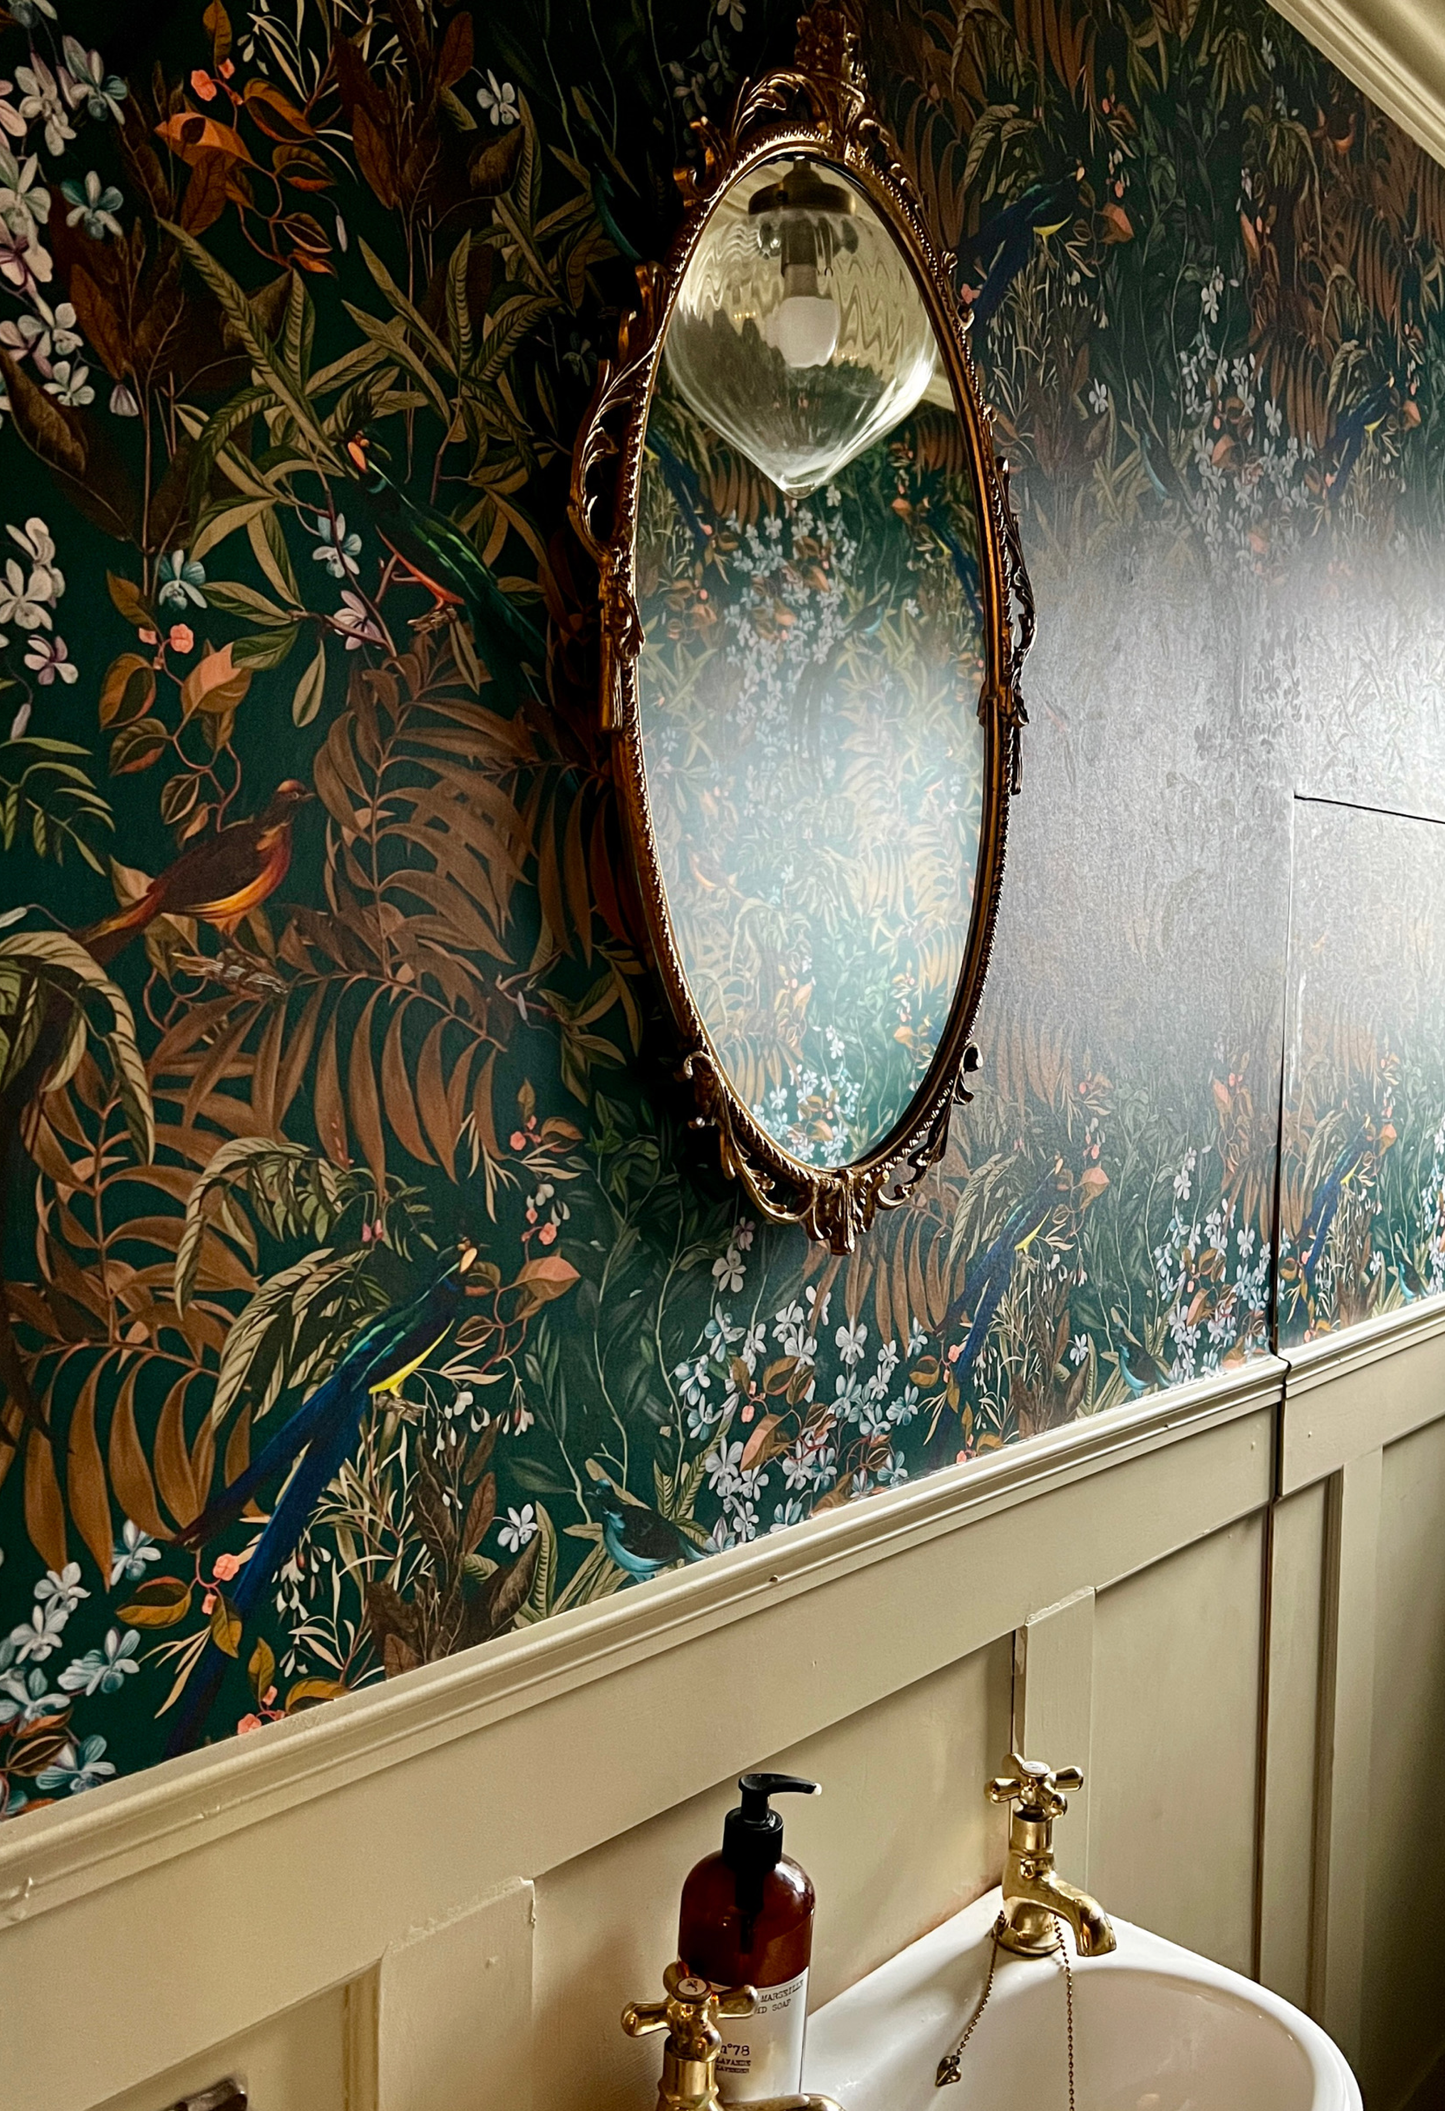 Vintage inspire luxury bathroom with botanical dark wallpaper with birds and flowers in a rainforest from Deus ex Gardenia of the Resplendent Woods Wallpaper in Forest. Photo by Delve Interiors.